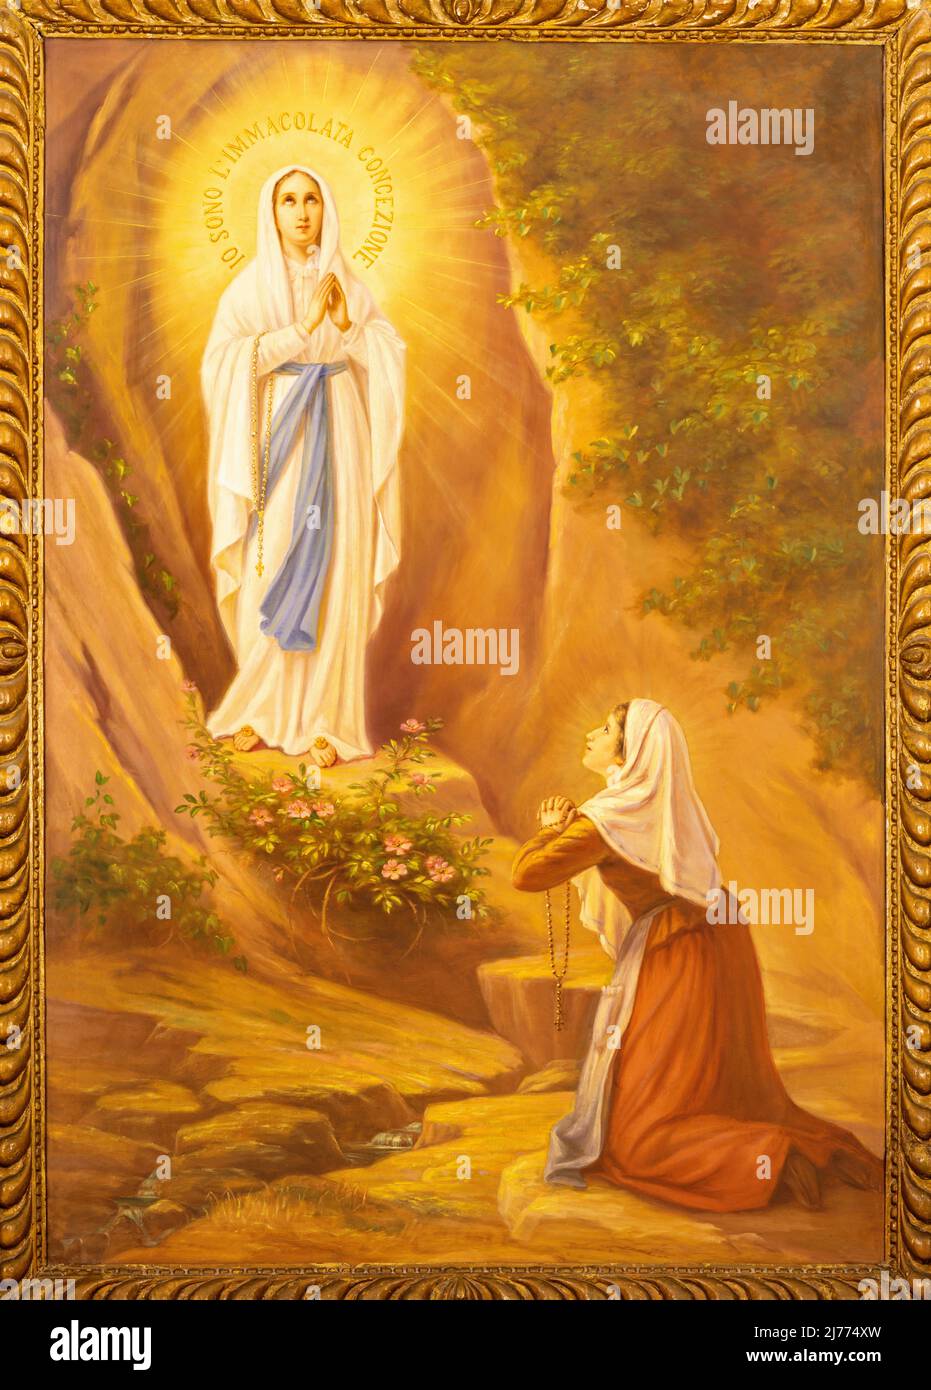 MONOPOLI, ITALY - MARCH 6, 2022:The painting of Appearance of Virgin Masry to st. Bernadette in Lourdes  in the church Chiesa di San Franceso d Assisi Stock Photo